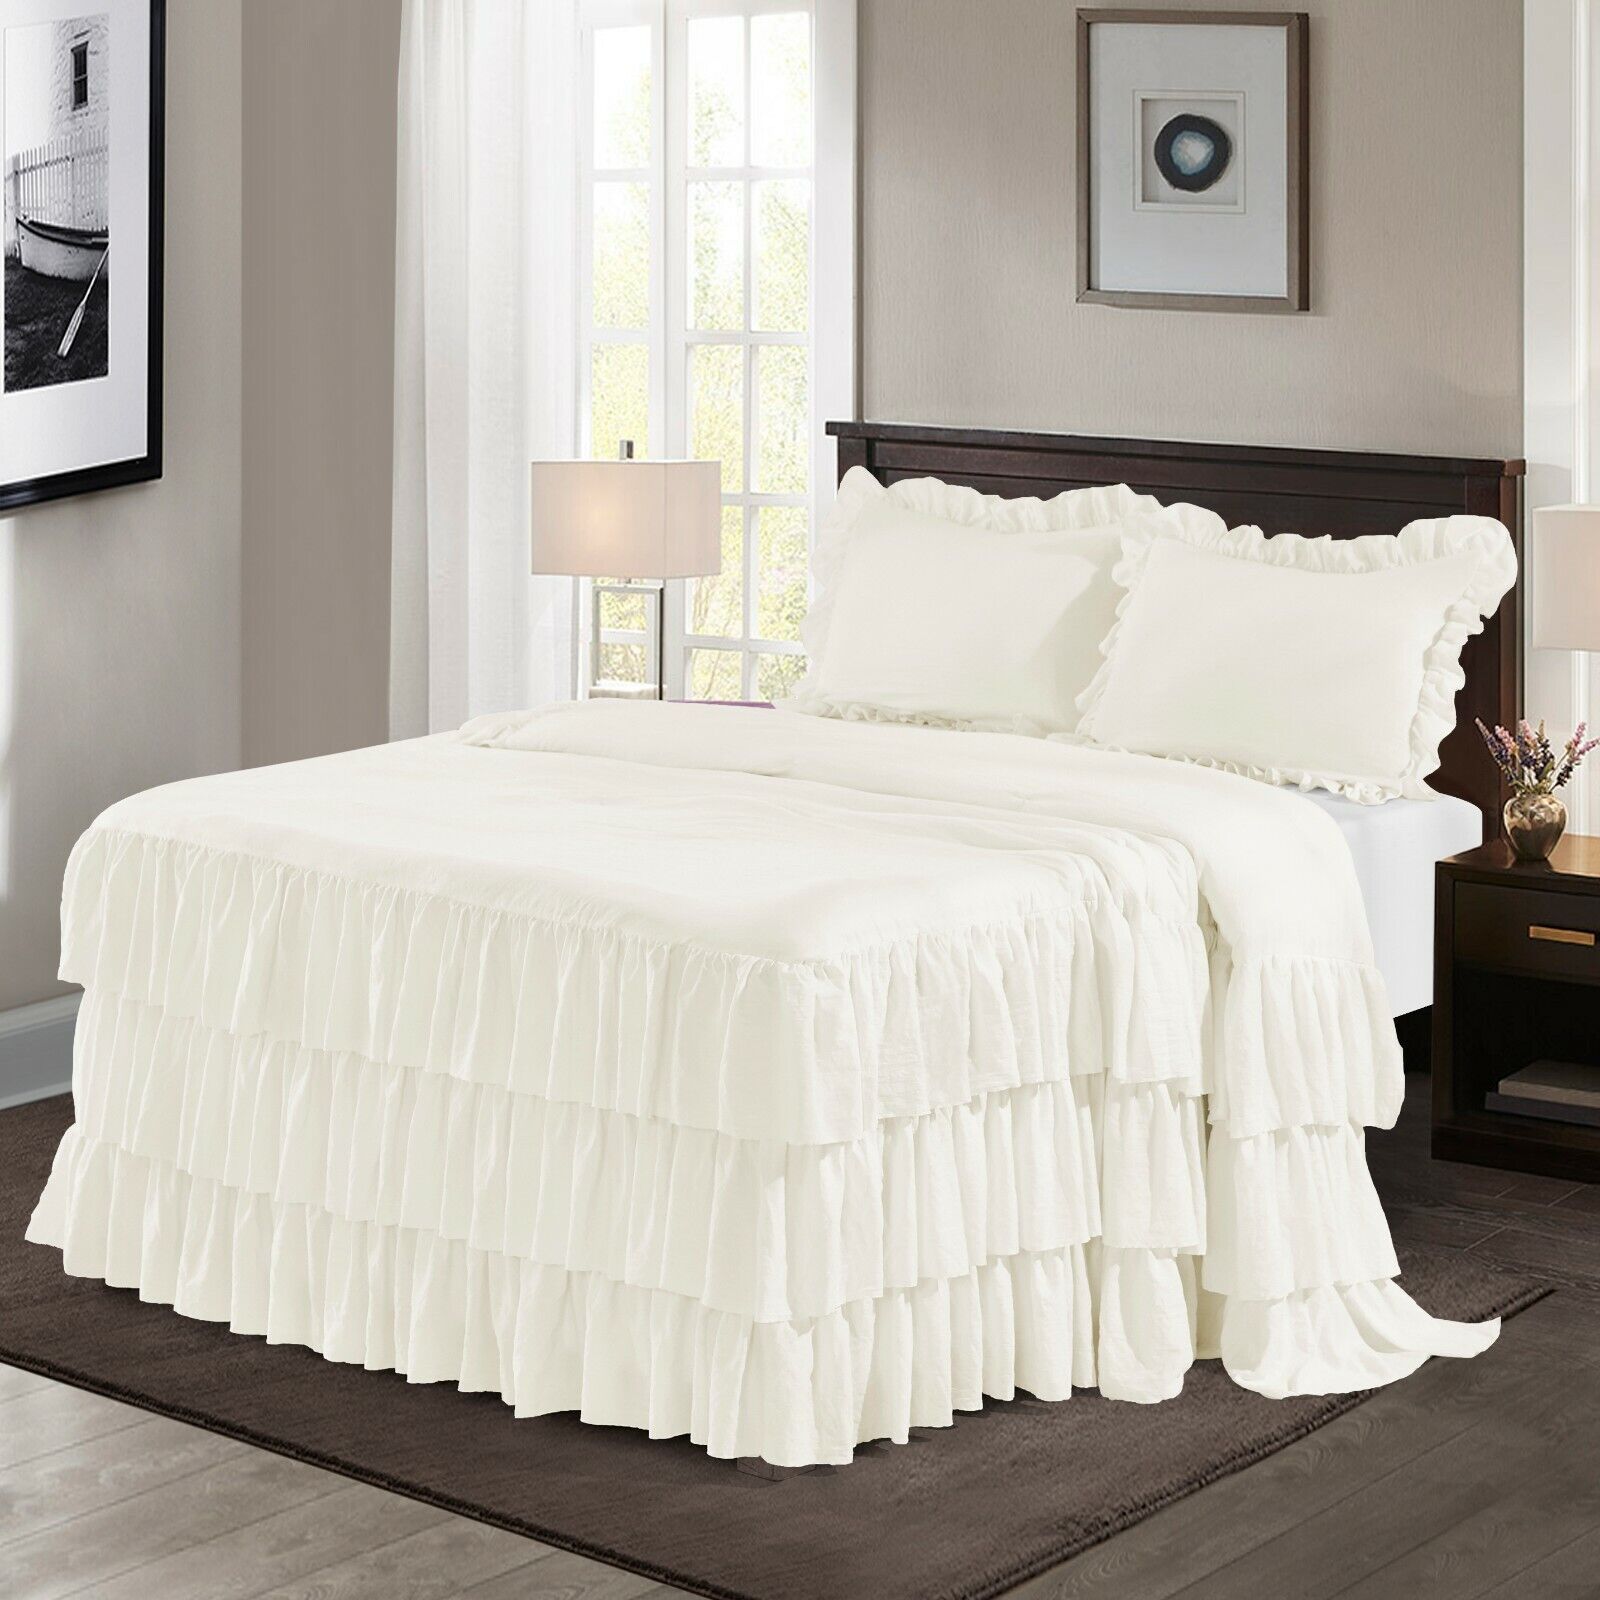 HIG 3 Piece ECHO Classic Ruffle Skirt Bedspread Set 30 inches Drop - Ivory